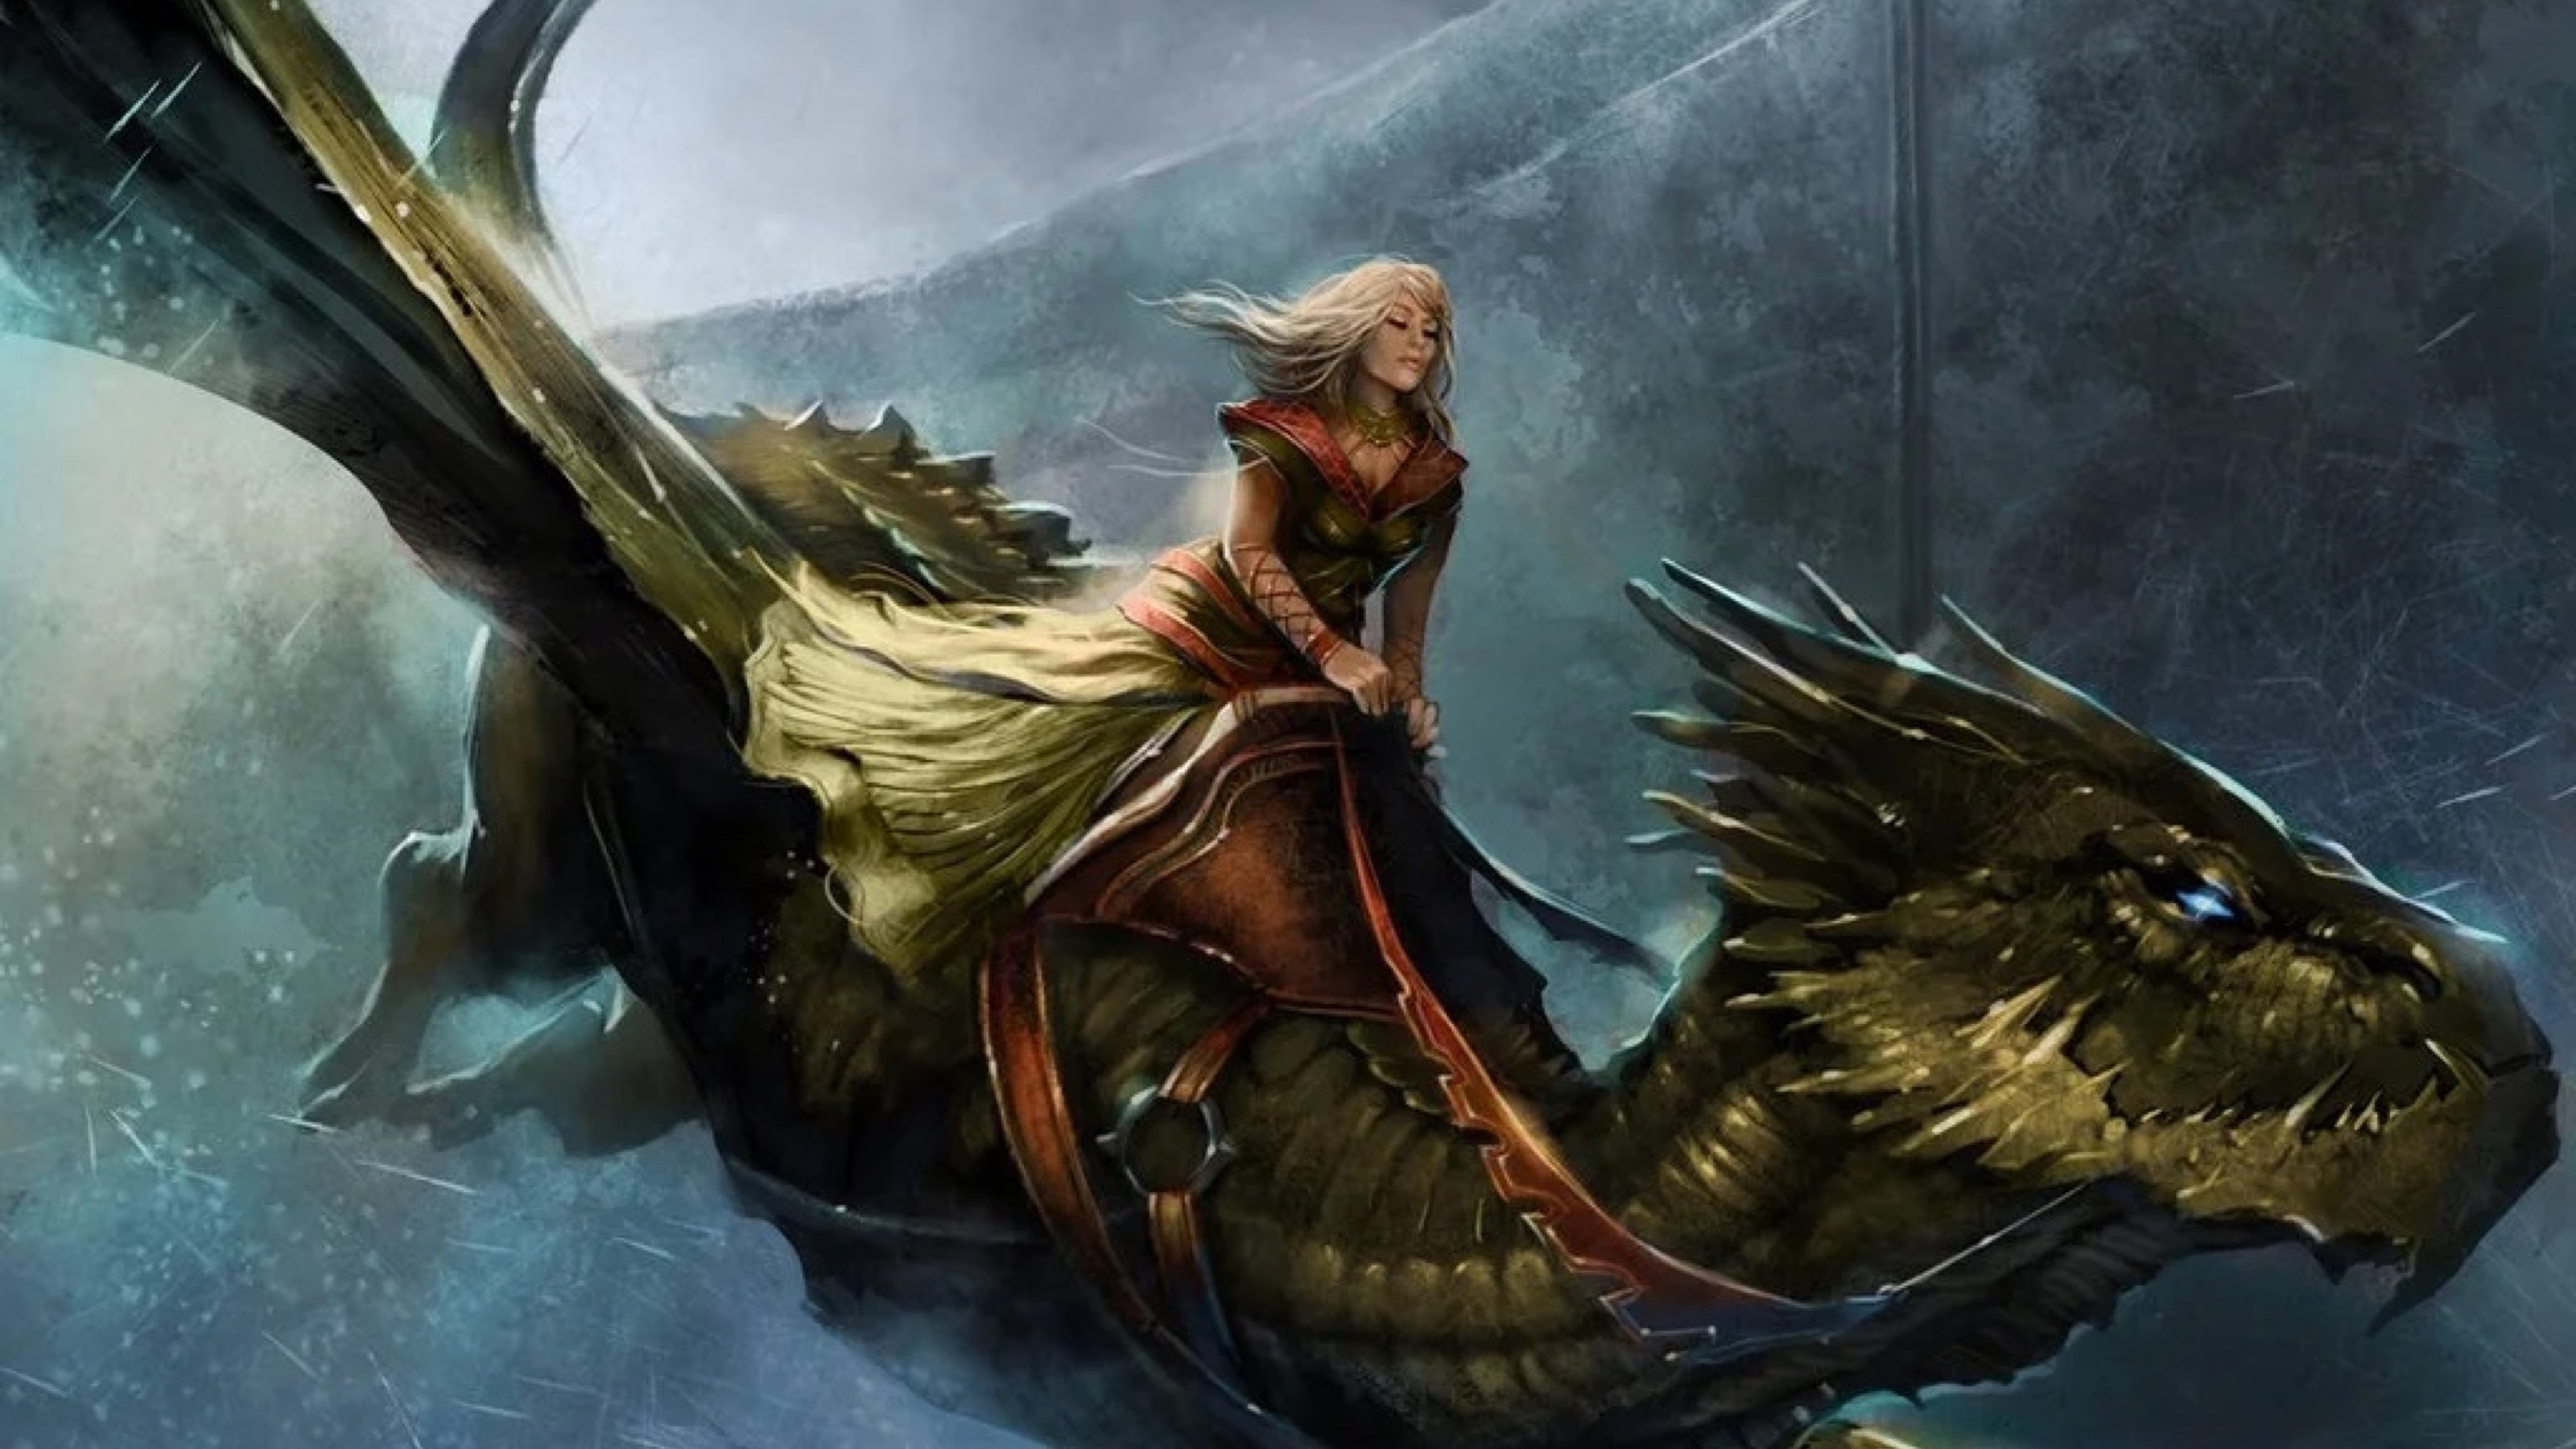 Art of Queen Alysanne riding her dragon Silverwing by Emile Denis. Seen in Green Room's A Song of Ice and Fire Role-Playing Game. (Image: Green Room Publishing)